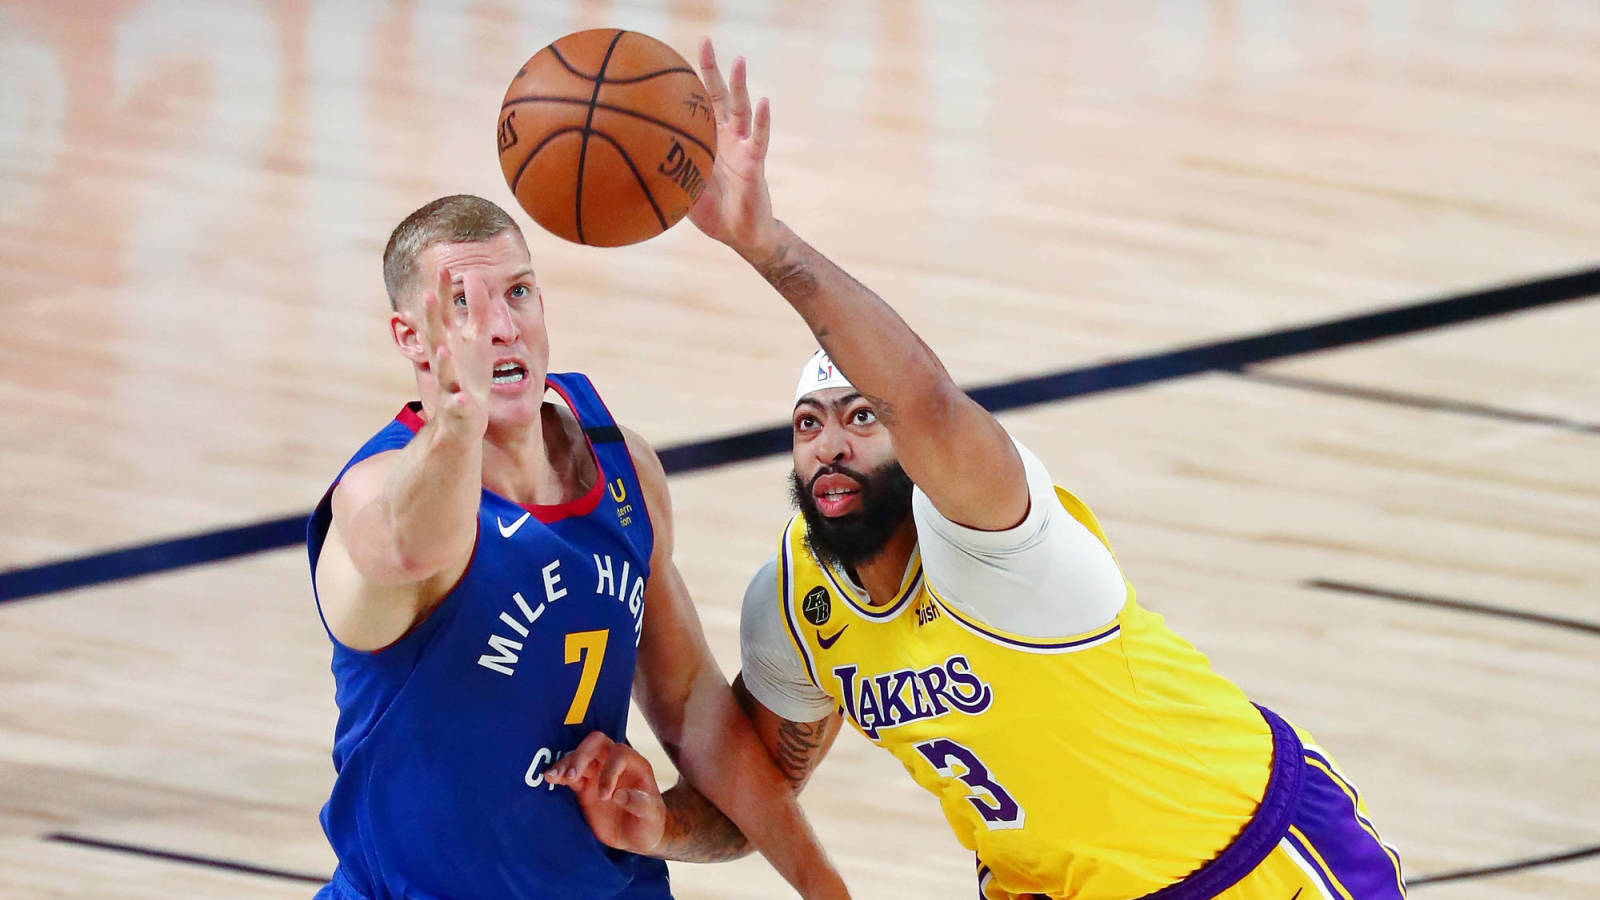 Mason Plumlee roasted for his terrible 